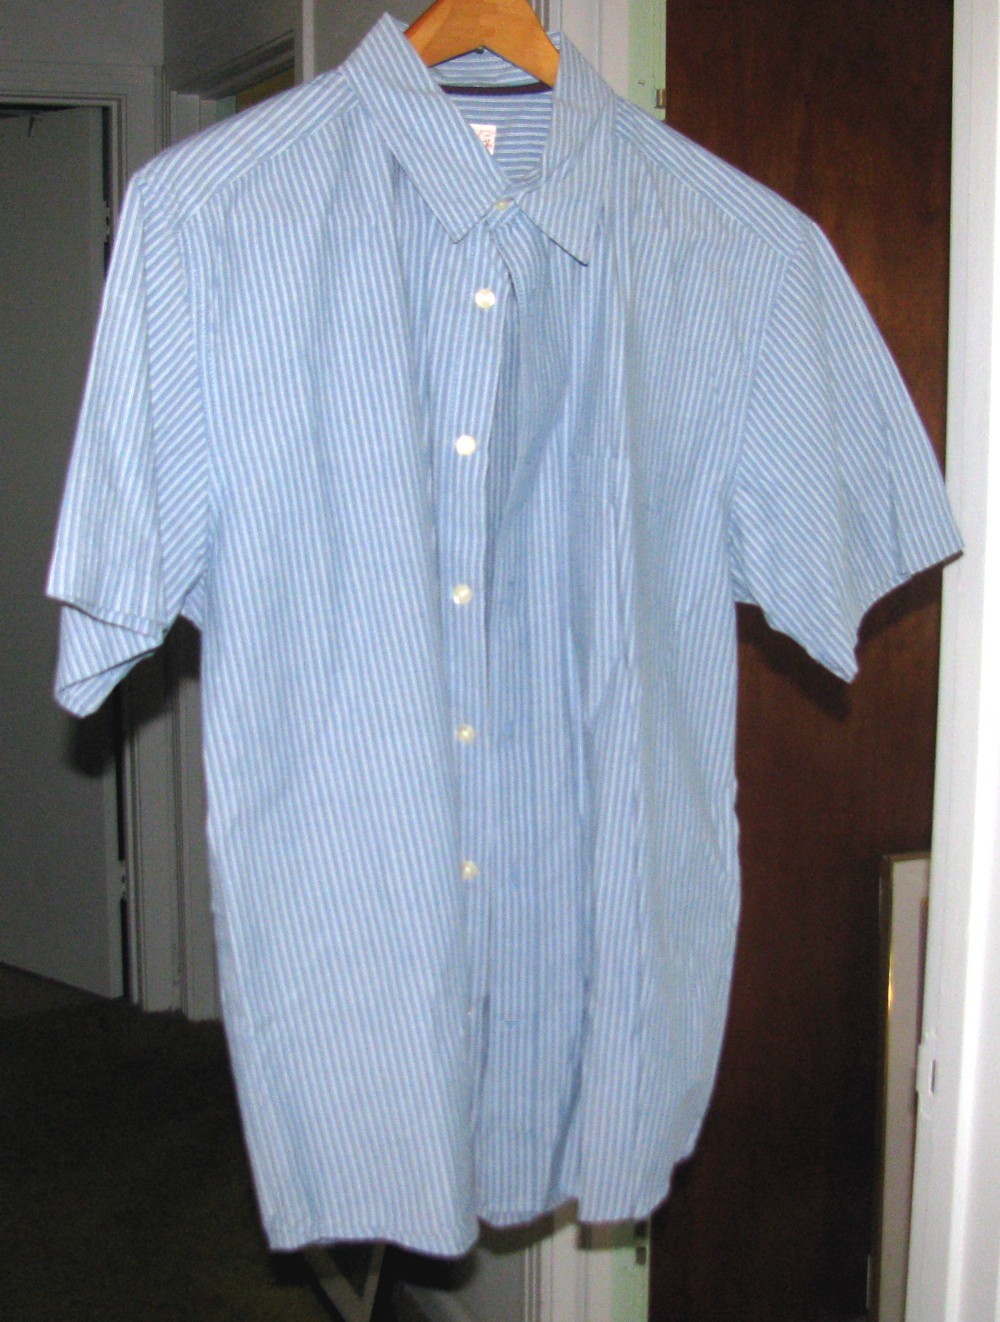 Primary image for White & Light Grey Cotton Dress Shirt Old Navy Sz M